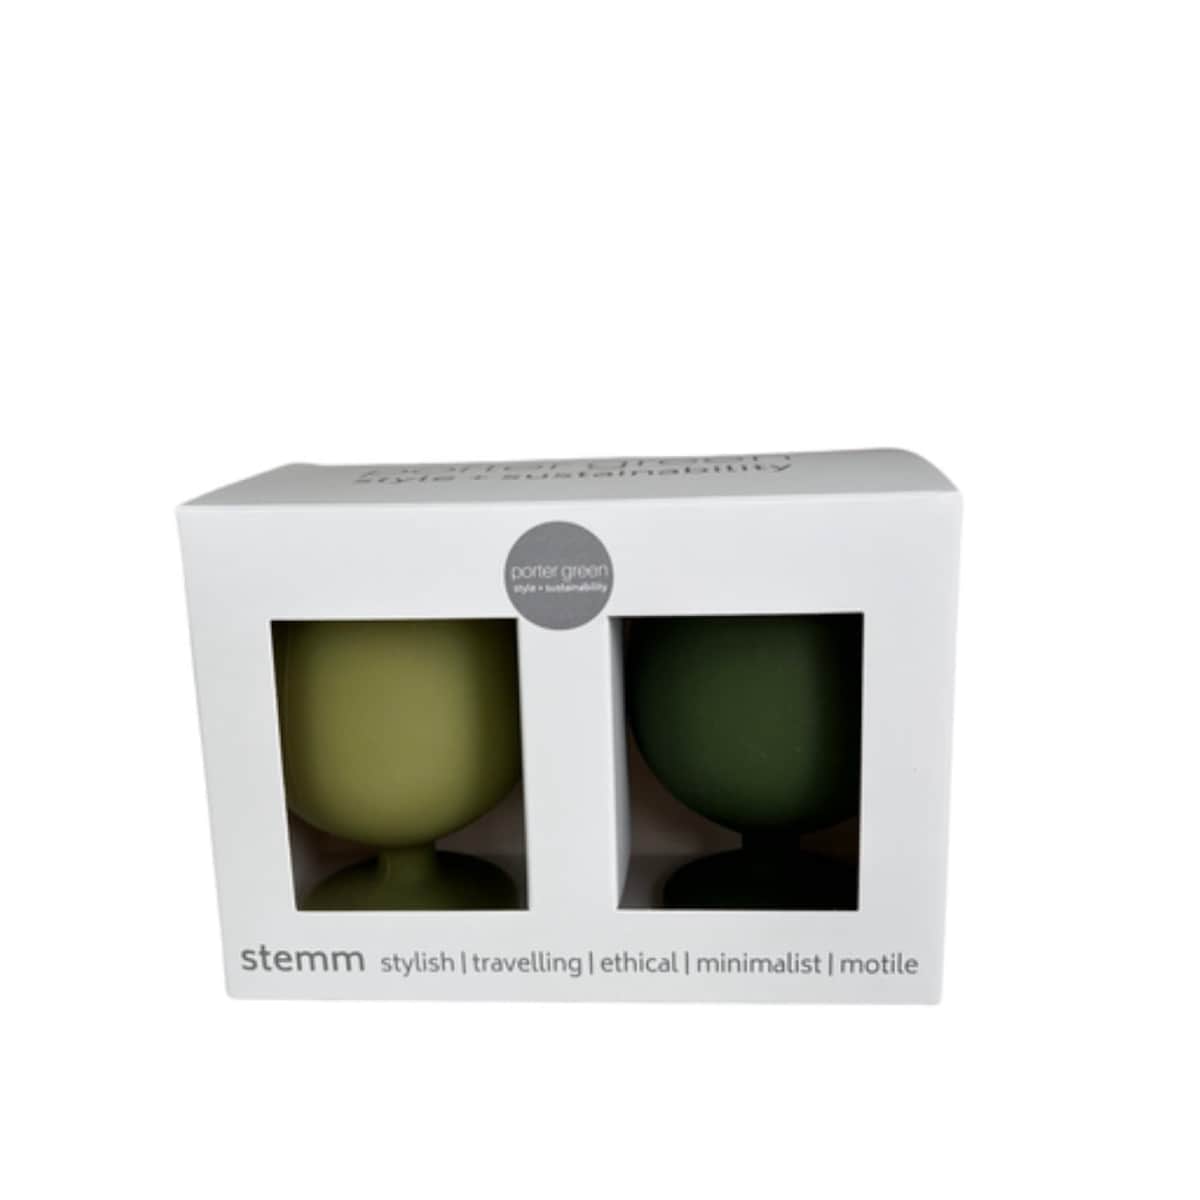 Porter Green Stemm Unbreakable Silicone Wine Glass Set Stirling 2x250ml